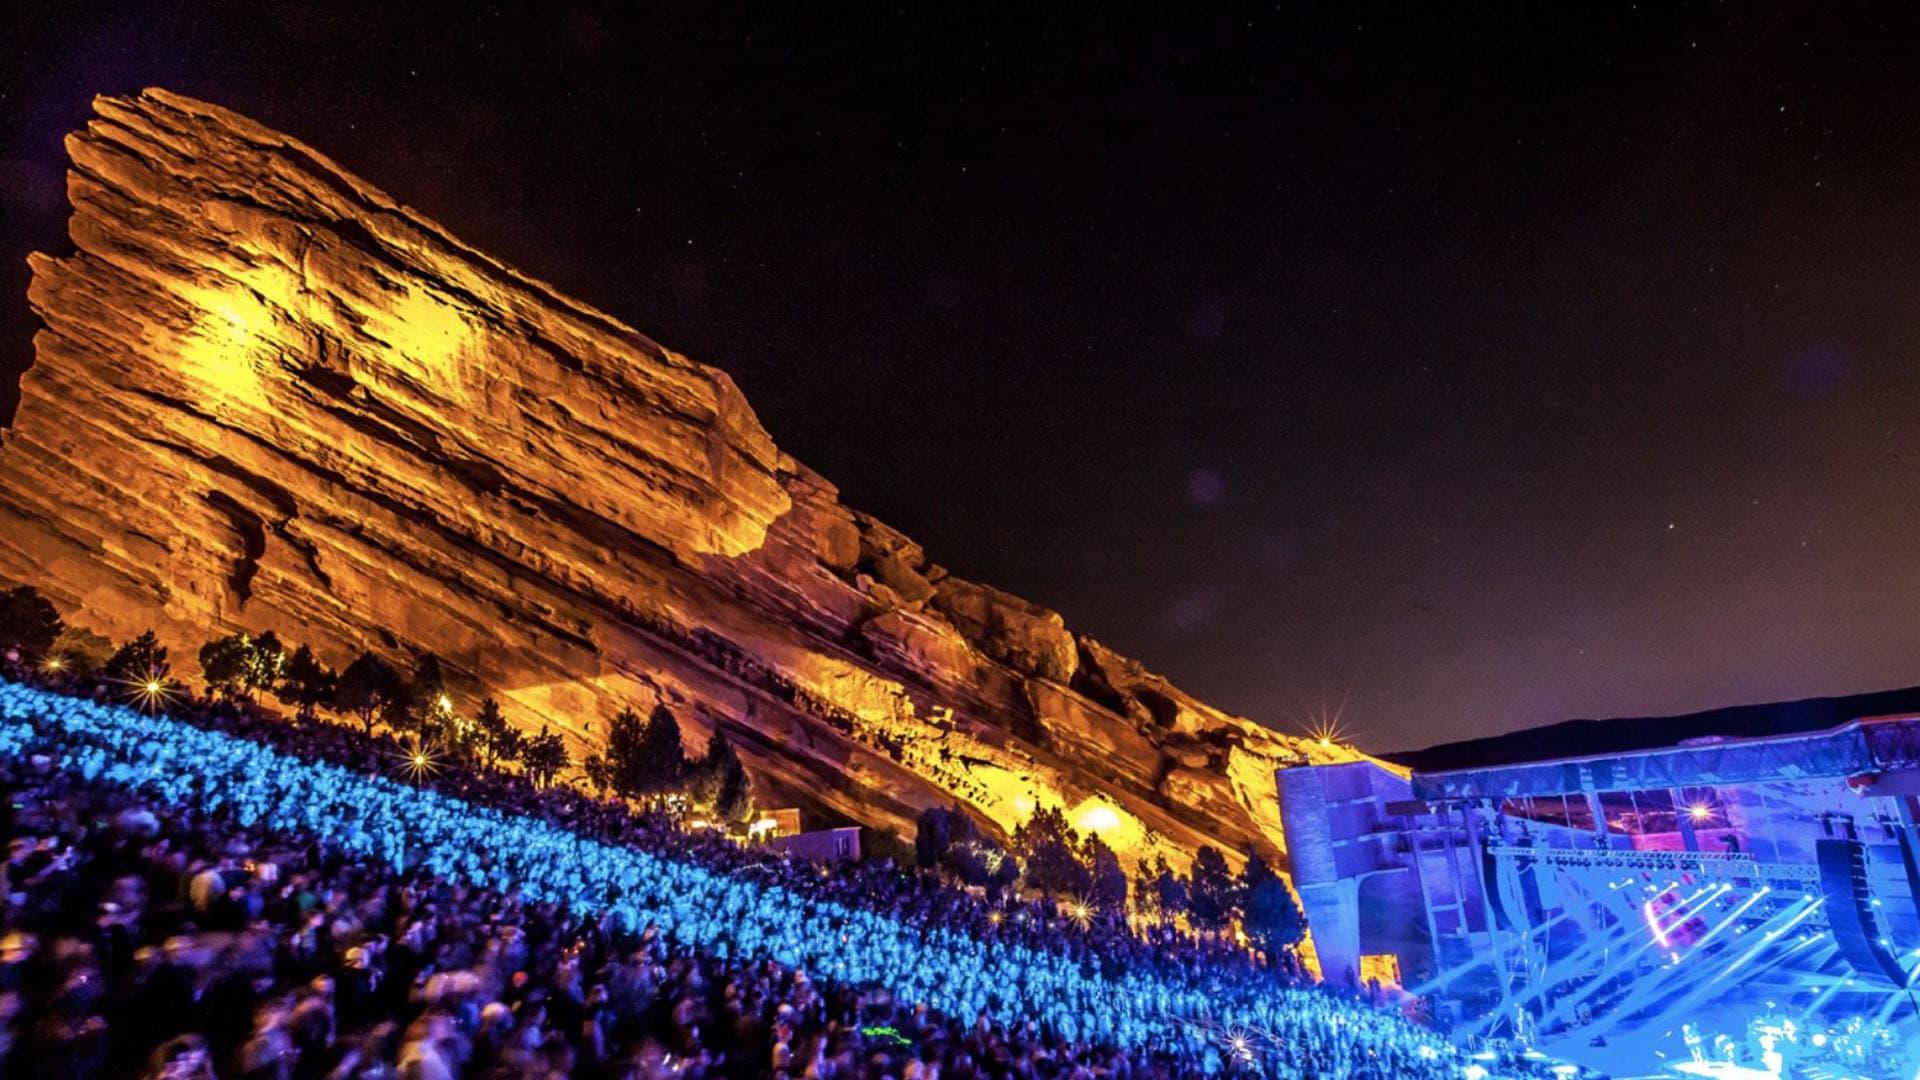 Incubus - Alive at Red Rocks backdrop